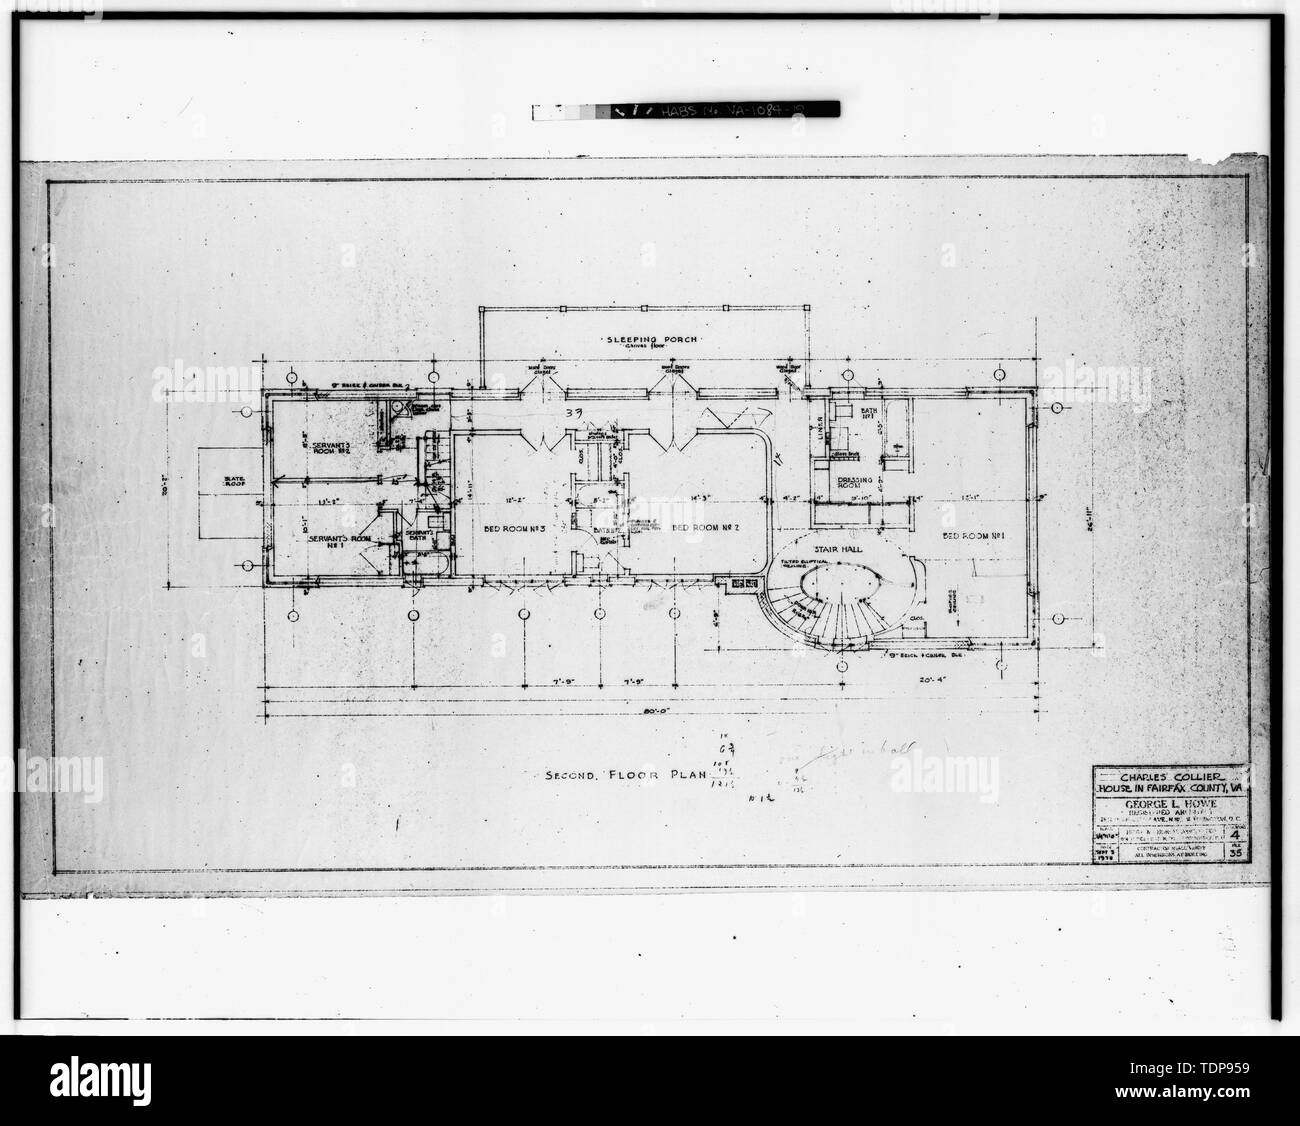 Photocopy of blackline print in possession of Mrs. William L. Reno. Original drawing by George Locke Howe, Architect 1938. 'SECOND FLOOR PLAN' - Mr. and Mrs. Charles Collier House, 6080 Leesburg Pike, Falls Church, Falls Church, VA; Howe, George Locke; Keily, Dan; Morris, Scott, transmitter Stock Photo